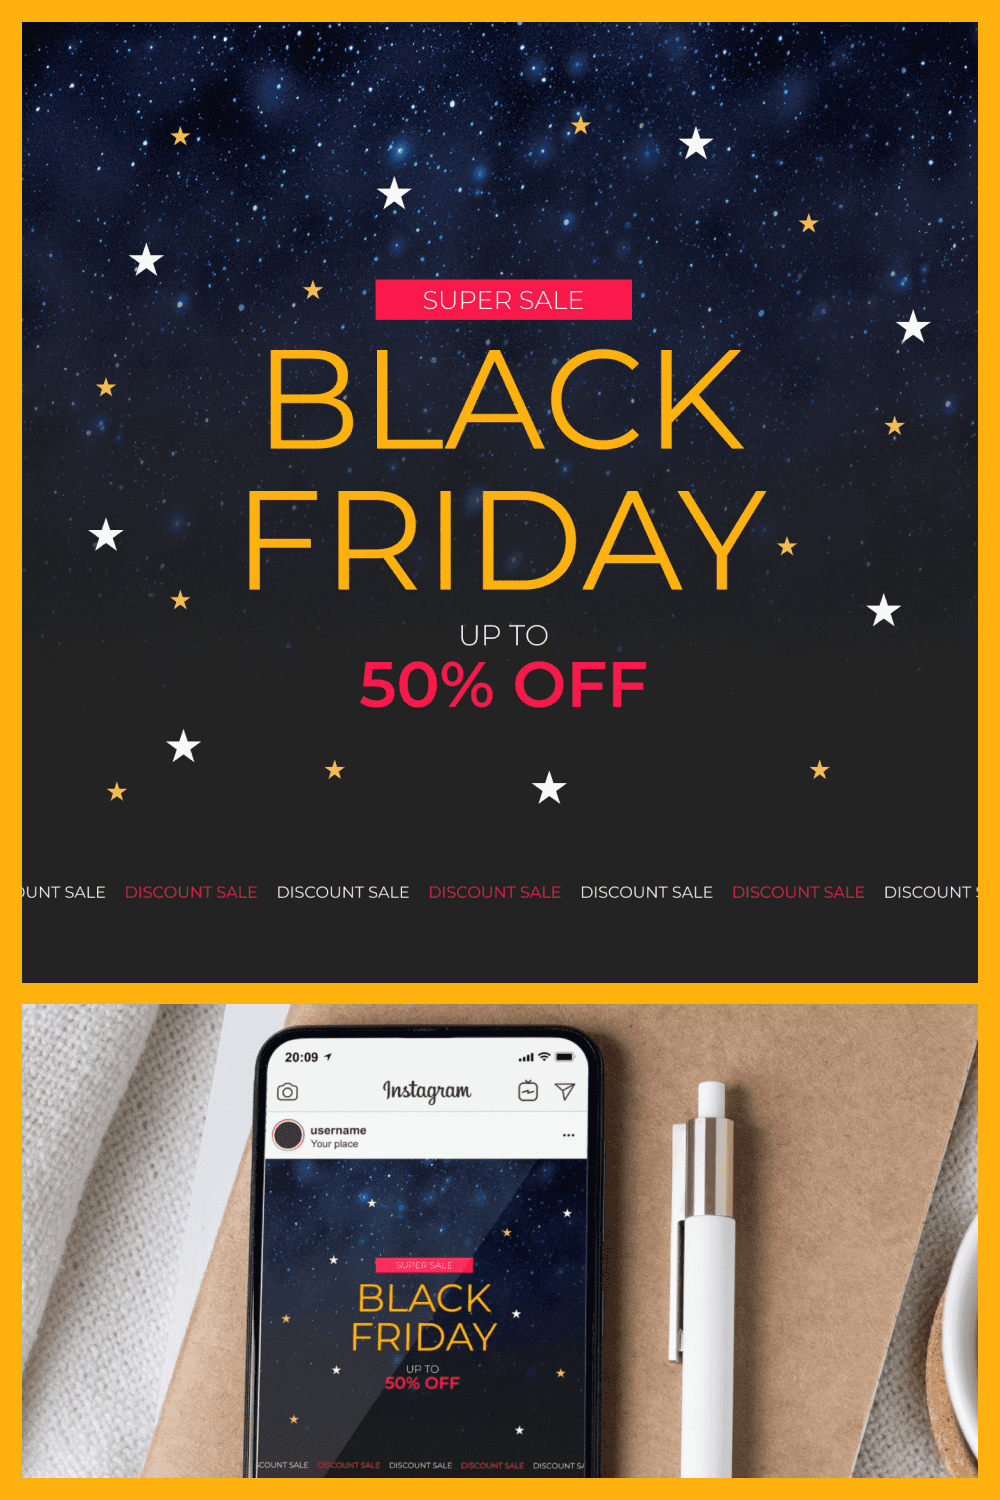 Black Friday Social Media Banners with Night Sky Background.